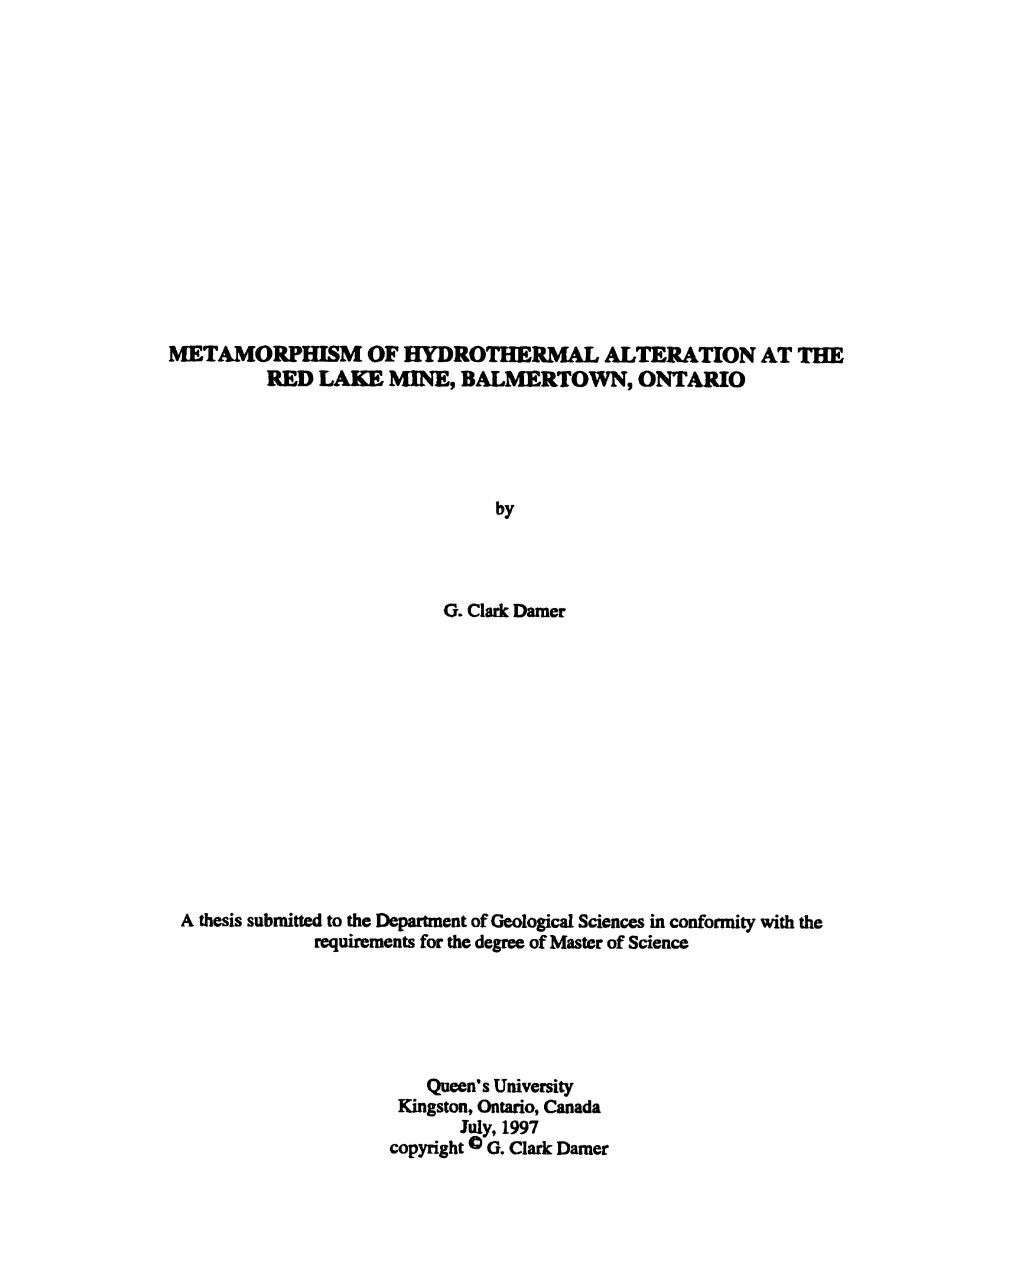 Metamorphism of Hydrothermal Alteration at the Red Lake Mine, Balmertown, Ontario